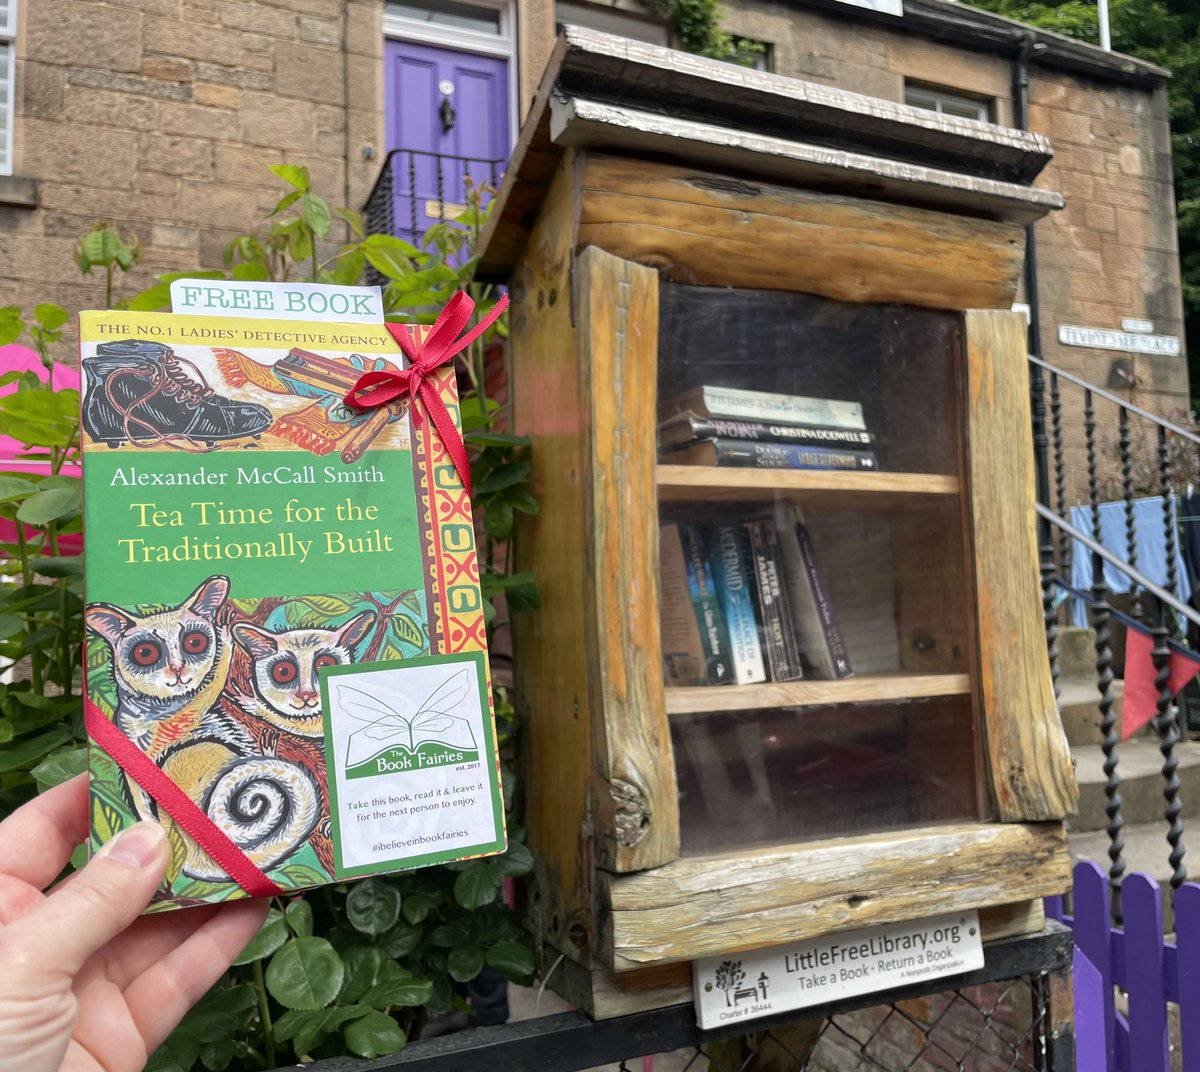 This week #bookfairiesedinburgh are celebrating Little Free Library Week by sharing books by #Edinburgh authors in some of the little libraries around the city. Today we visited the Stockbridge Colonies and left a book by Alexander McCall Smith. #Ibelieveinbookfairies #lflweek